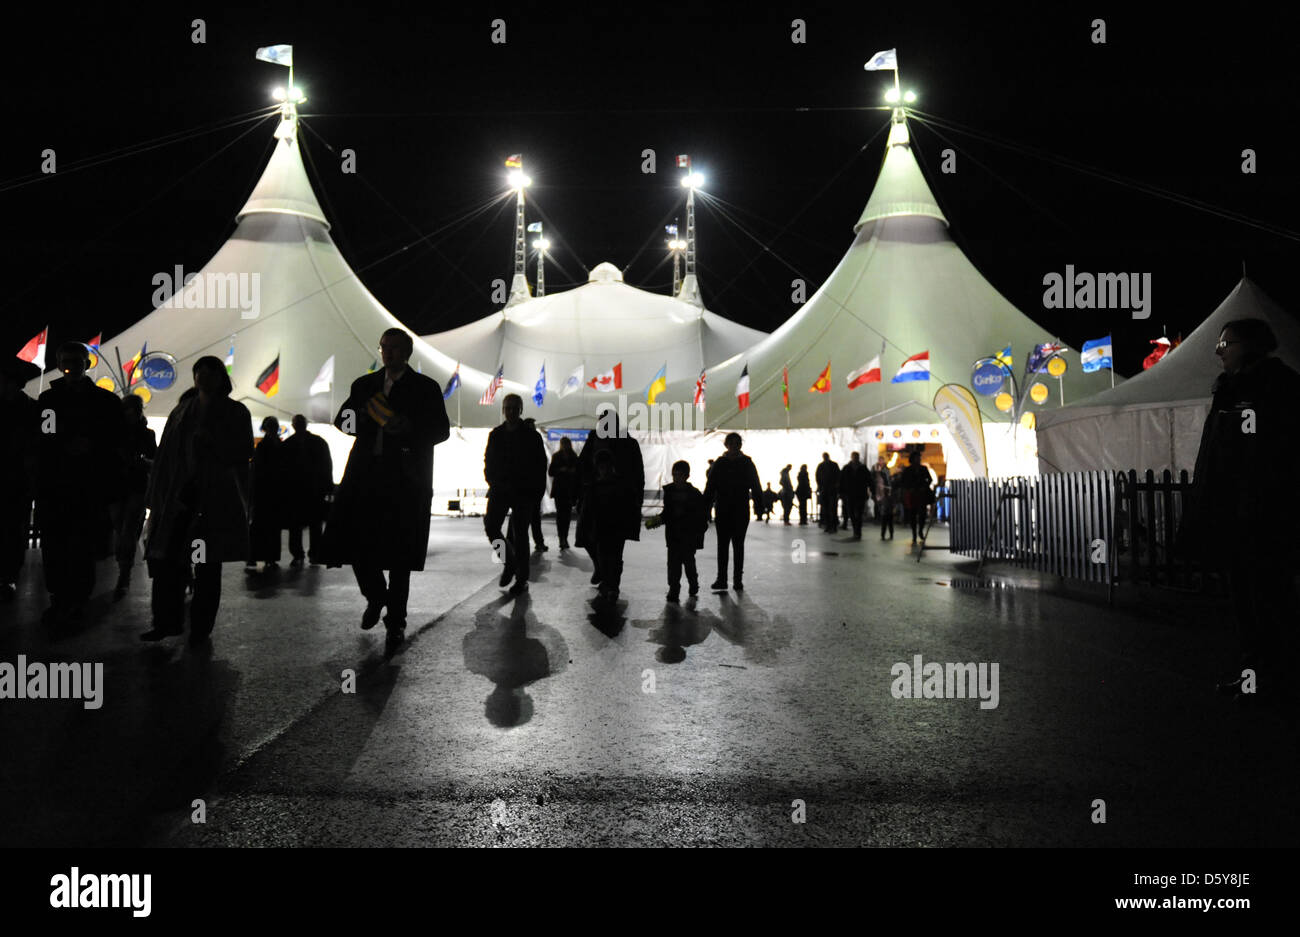 People leave the circus tent after rehearsals of the Cirque du Soleil in Duesseldorf, Germany 17 October 2012. The Cirque du Soleil tours with the show 'Corteo' within Germany and the 18 October 2012 is opening night. Photo: Daniel Naupold (ATTENTION: For editorial use only in connection with reports on Cirque du Soleil) Stock Photo